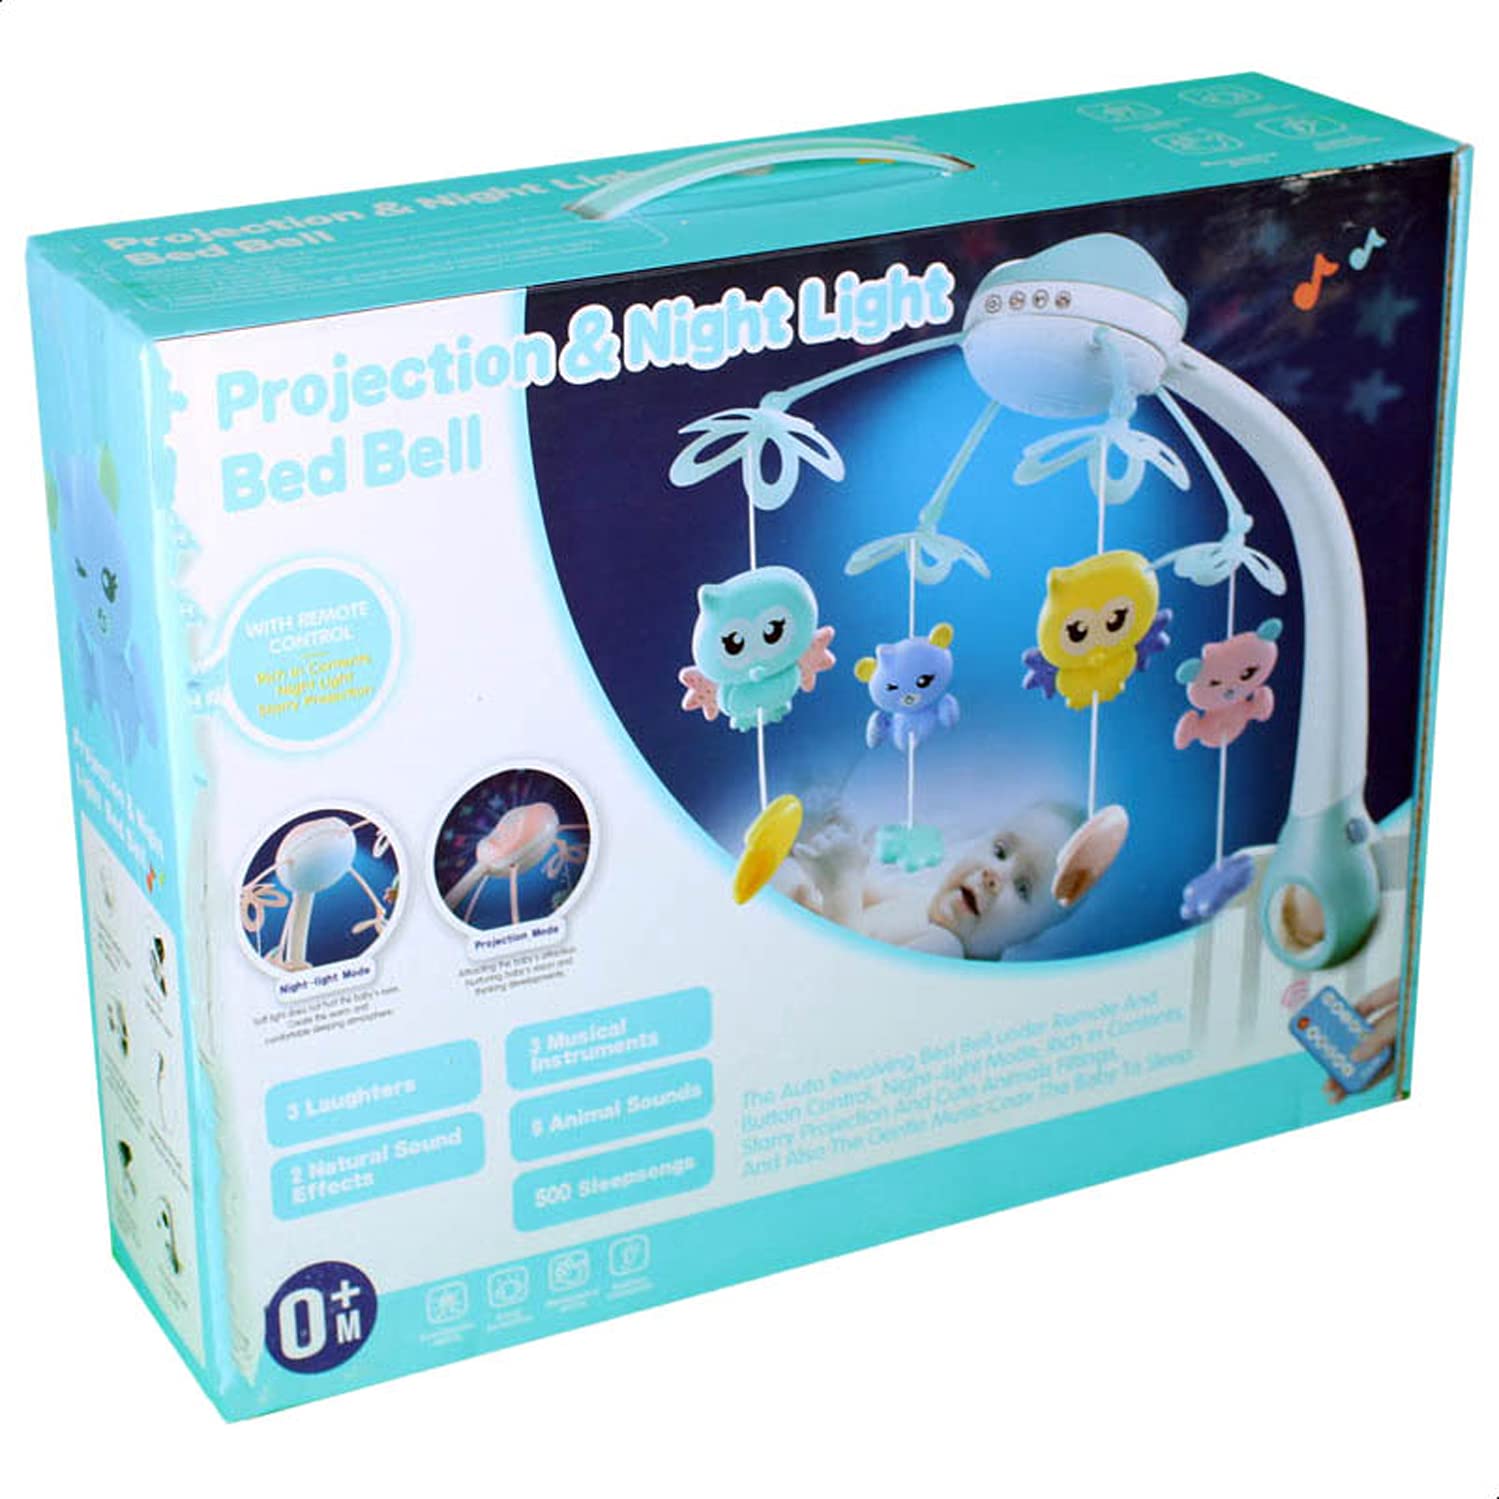 Baby cot mobile Baby Toys Bed Bell Musical Crib Mobile Hanging Cute Animals Rattles Newborn Early Learning Kids Toy with Light Projector